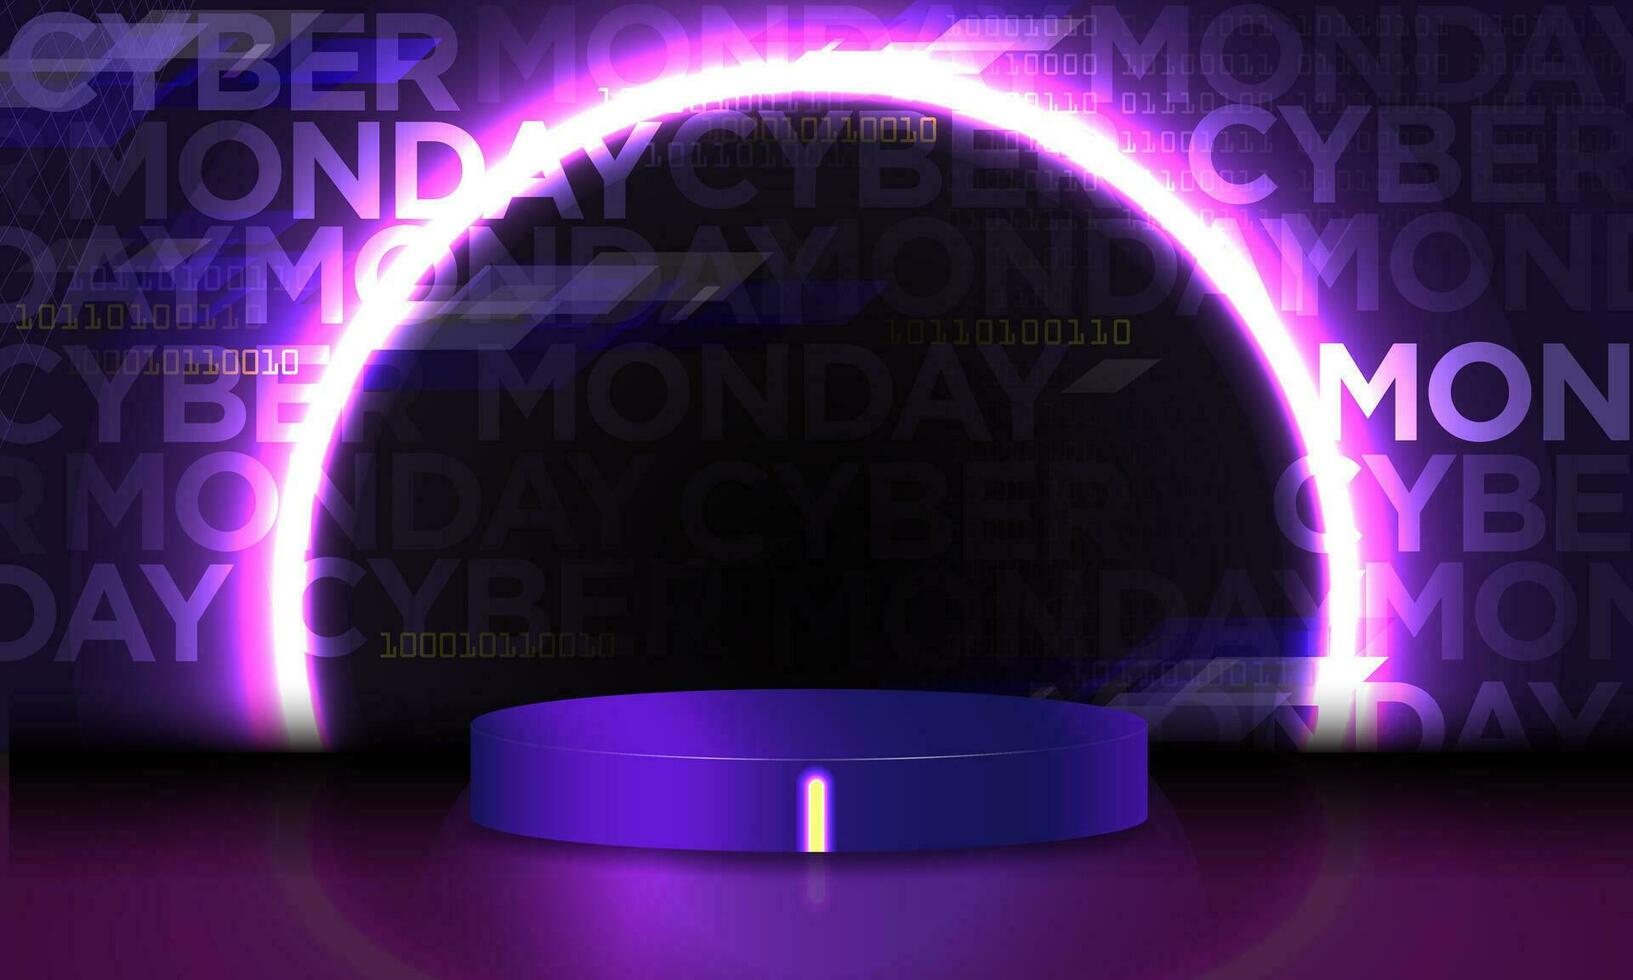 3D Rendered Cyber Monday Studio background with neon podium product display glowing ring, cyber Monday lettering. Vector Illustration. EPS 10.